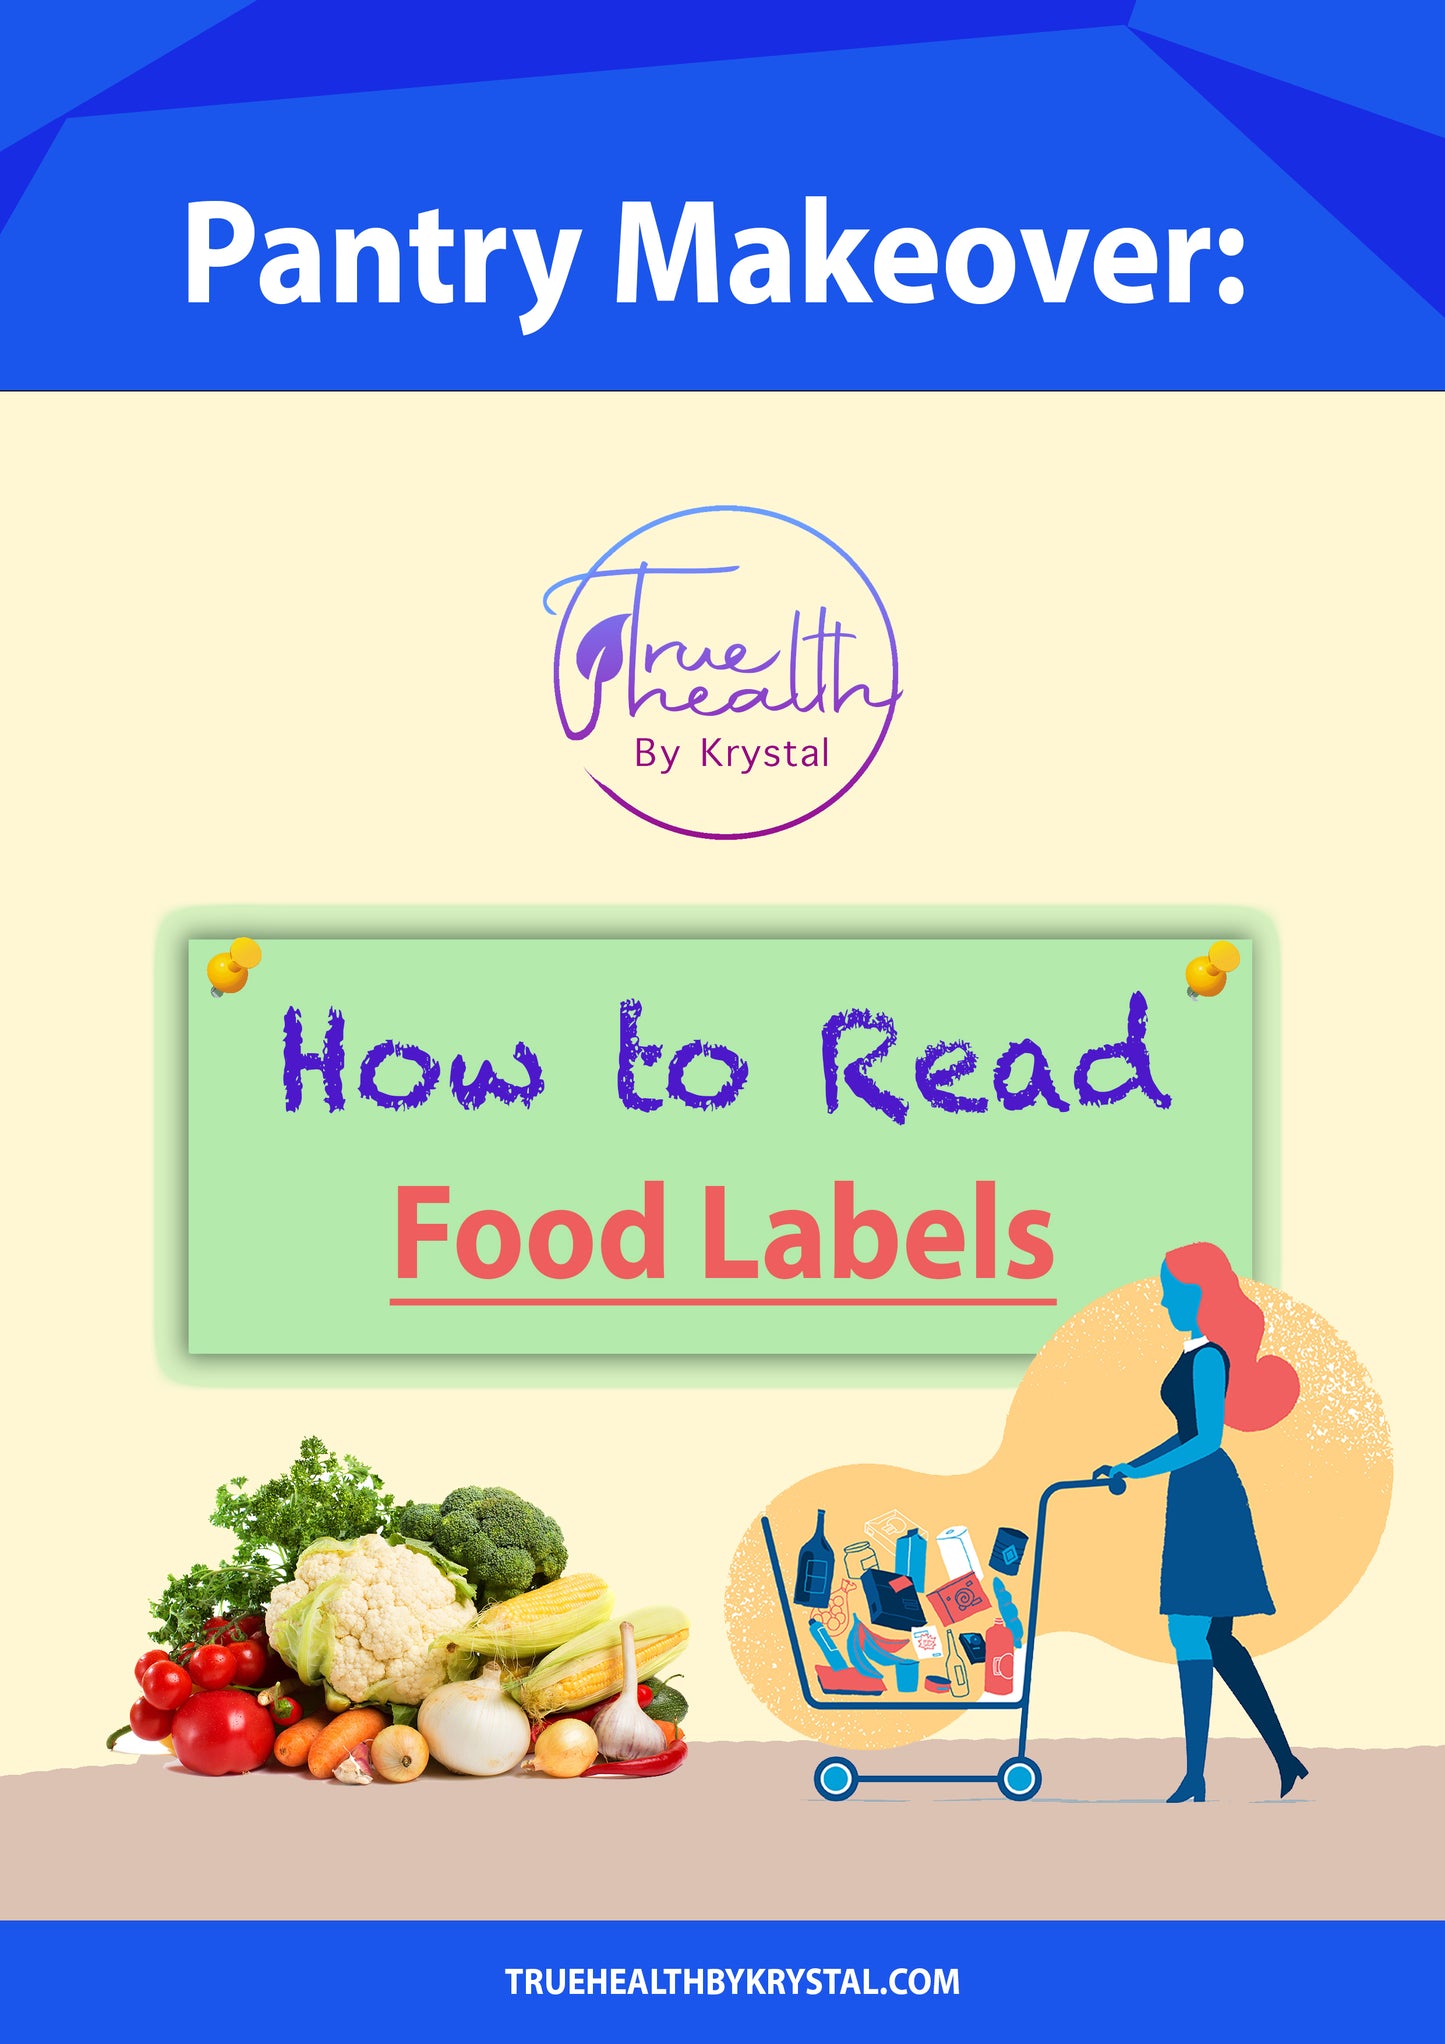 Pantry Makeover: How to Read Food Labels